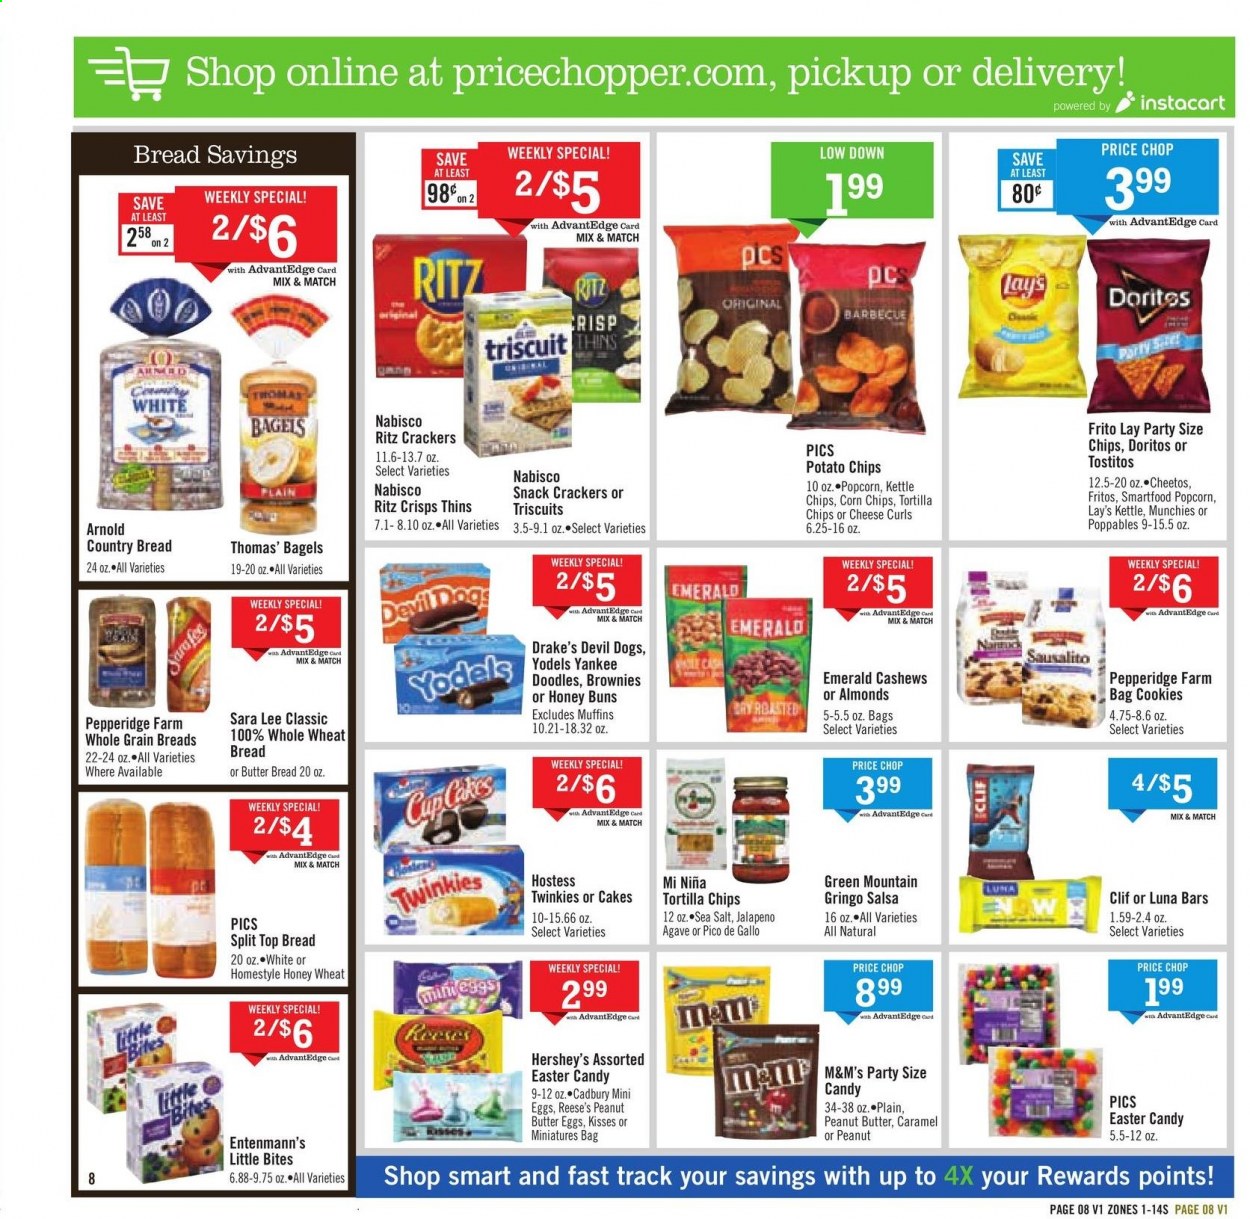 thumbnail - Price Chopper Flyer - 02/28/2021 - 03/06/2021 - Sales products - wheat bread, Sara Lee, bagels, cake, brownies, muffin, buns, Entenmann's, Little Bites, salsa, Reese's, Hershey's, cookies, M&M's, crackers, Cadbury, RITZ, Doritos, tortilla chips, potato chips, Cheetos, chips, snack, Lay’s, Smartfood, Thins, corn chips, popcorn, Tostitos, sea salt, jalapeño, Fritos, peanut butter, almonds, cashews, Green Mountain. Page 8.